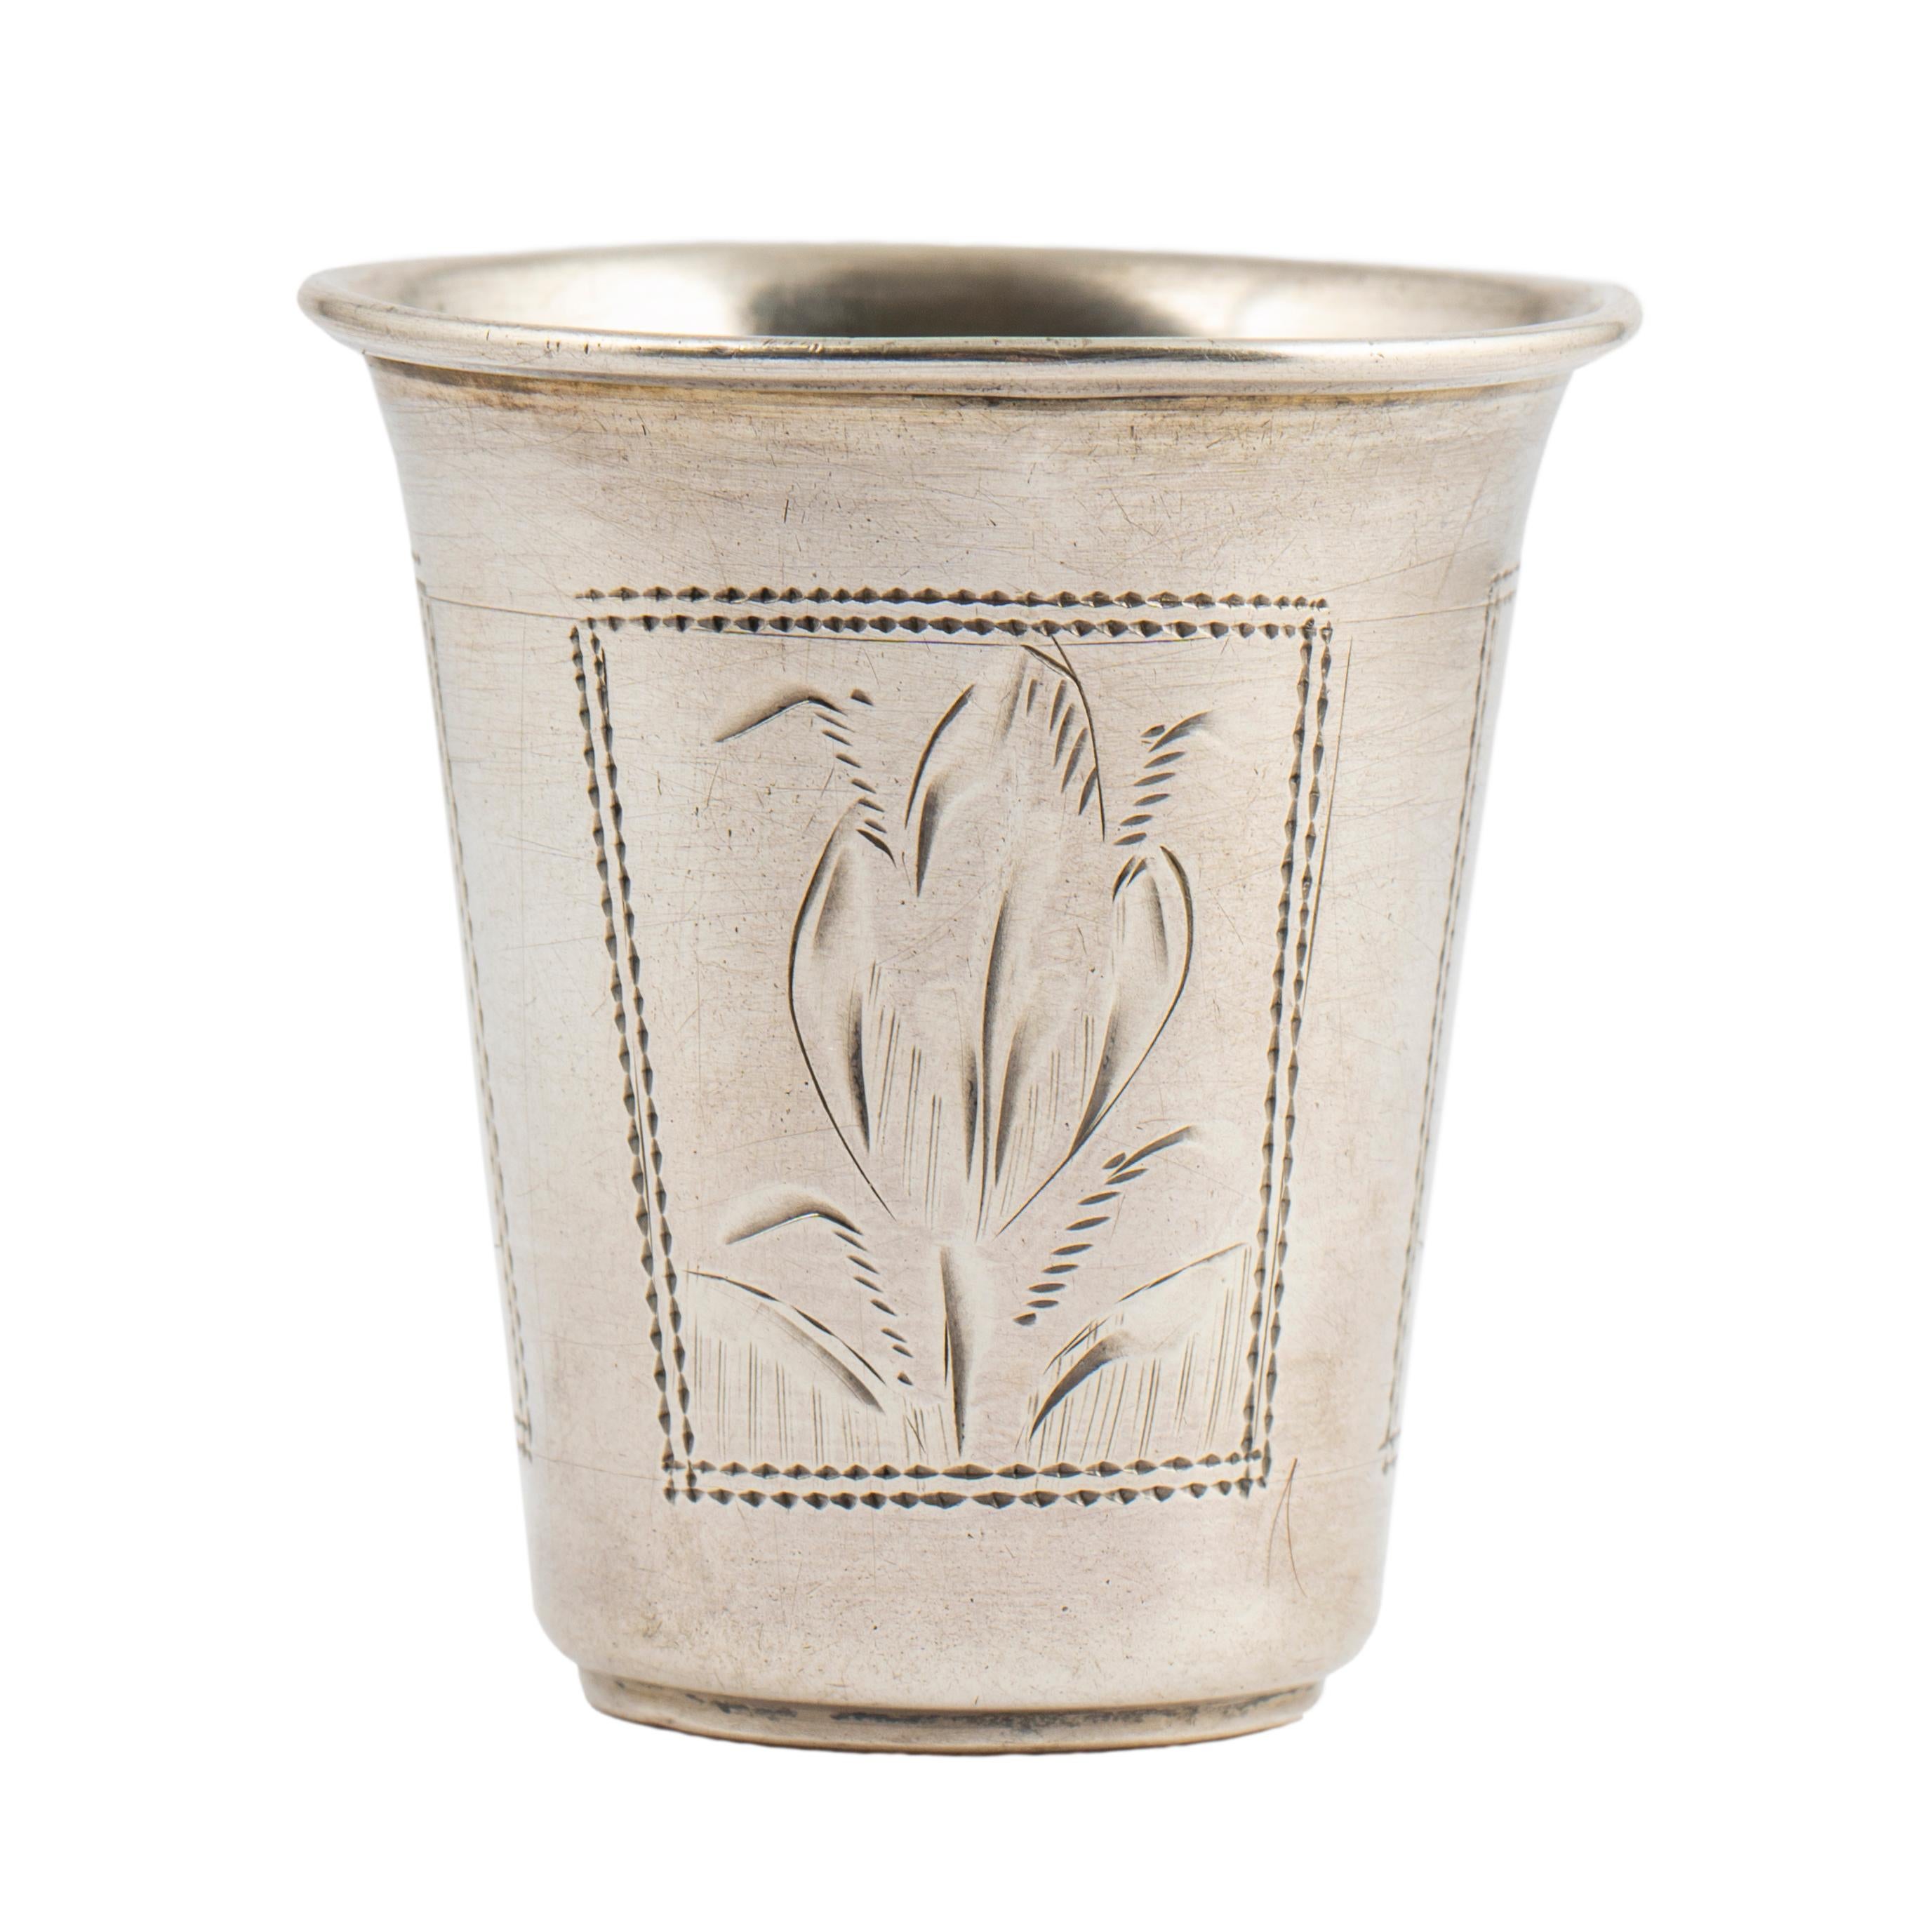 Five Ukrainian Imperial-era Silver Vodka Cups, late 19th to early 20th century 1